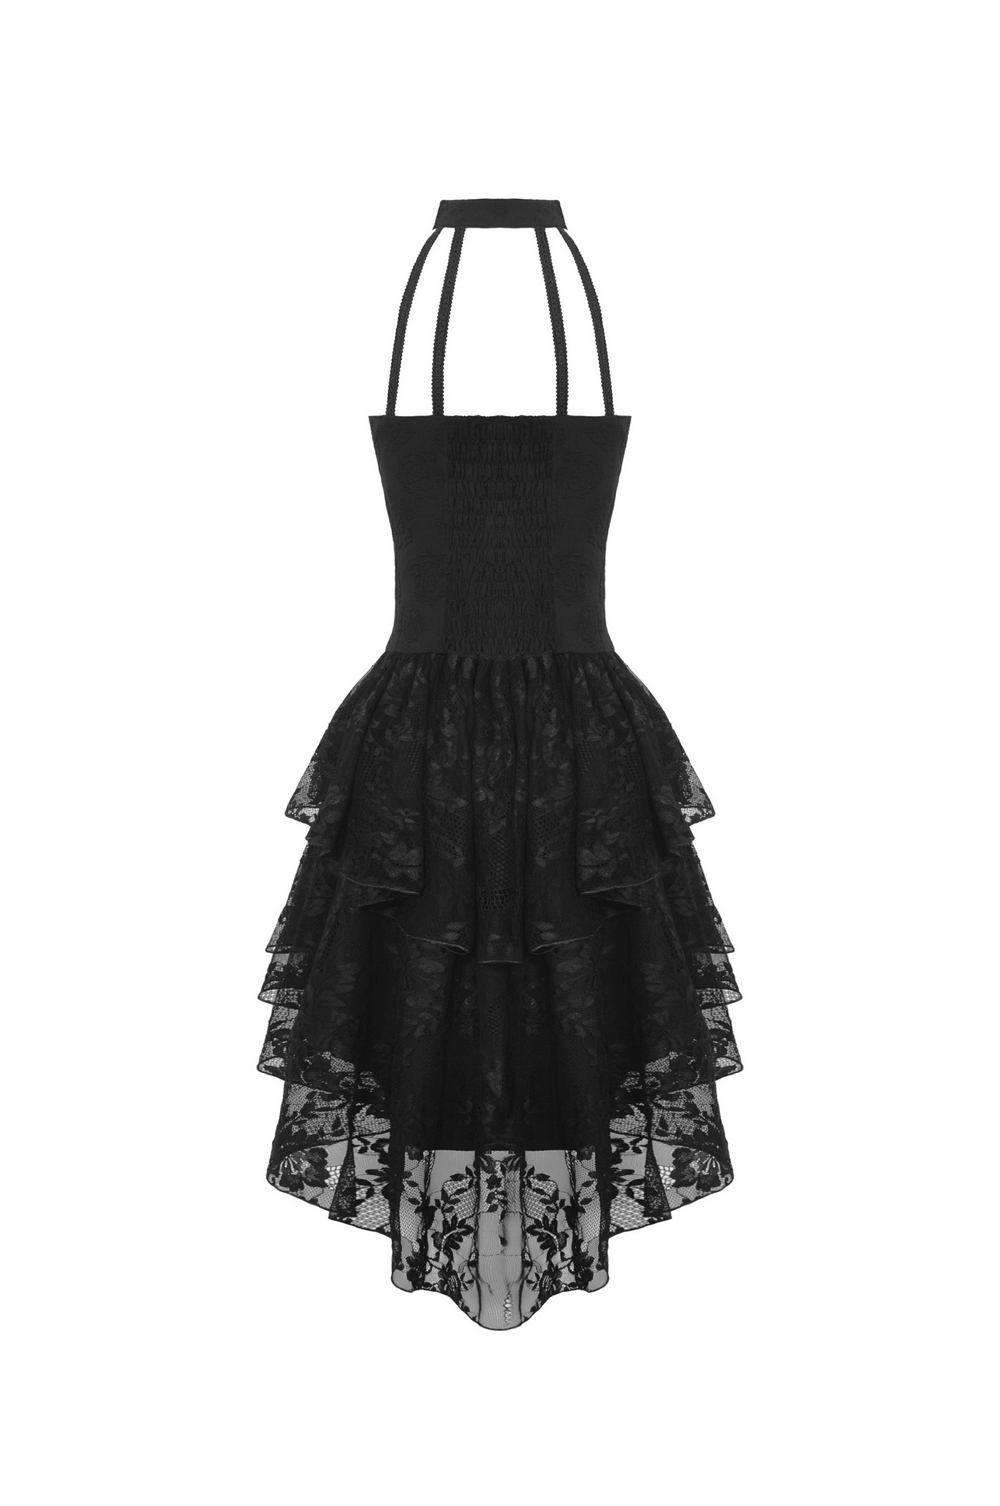 Gothic Lace High-Low Halter Dress with Tiere Skirt